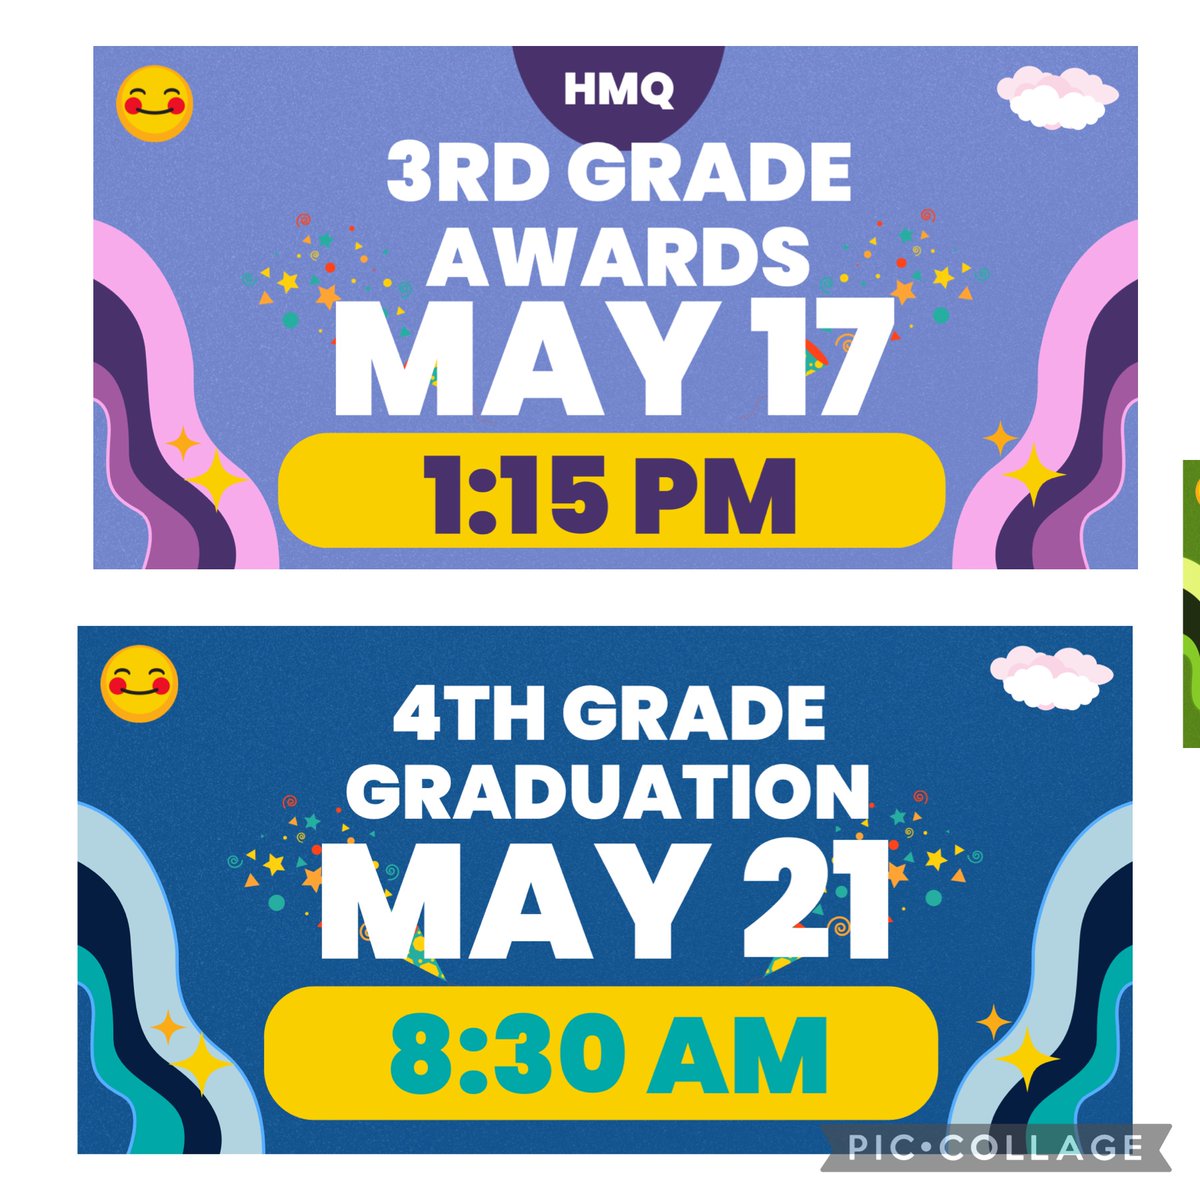 ✨🎓It’s Awards Season for Holmquist Hummingbirds! Get ready to celebrate excellence! As the school year wraps up, stay tuned for exciting ceremonies to recognize our outstanding students and staff. 🌟🏆 @kimtoneyHMQ #EndOfTheYearAwards